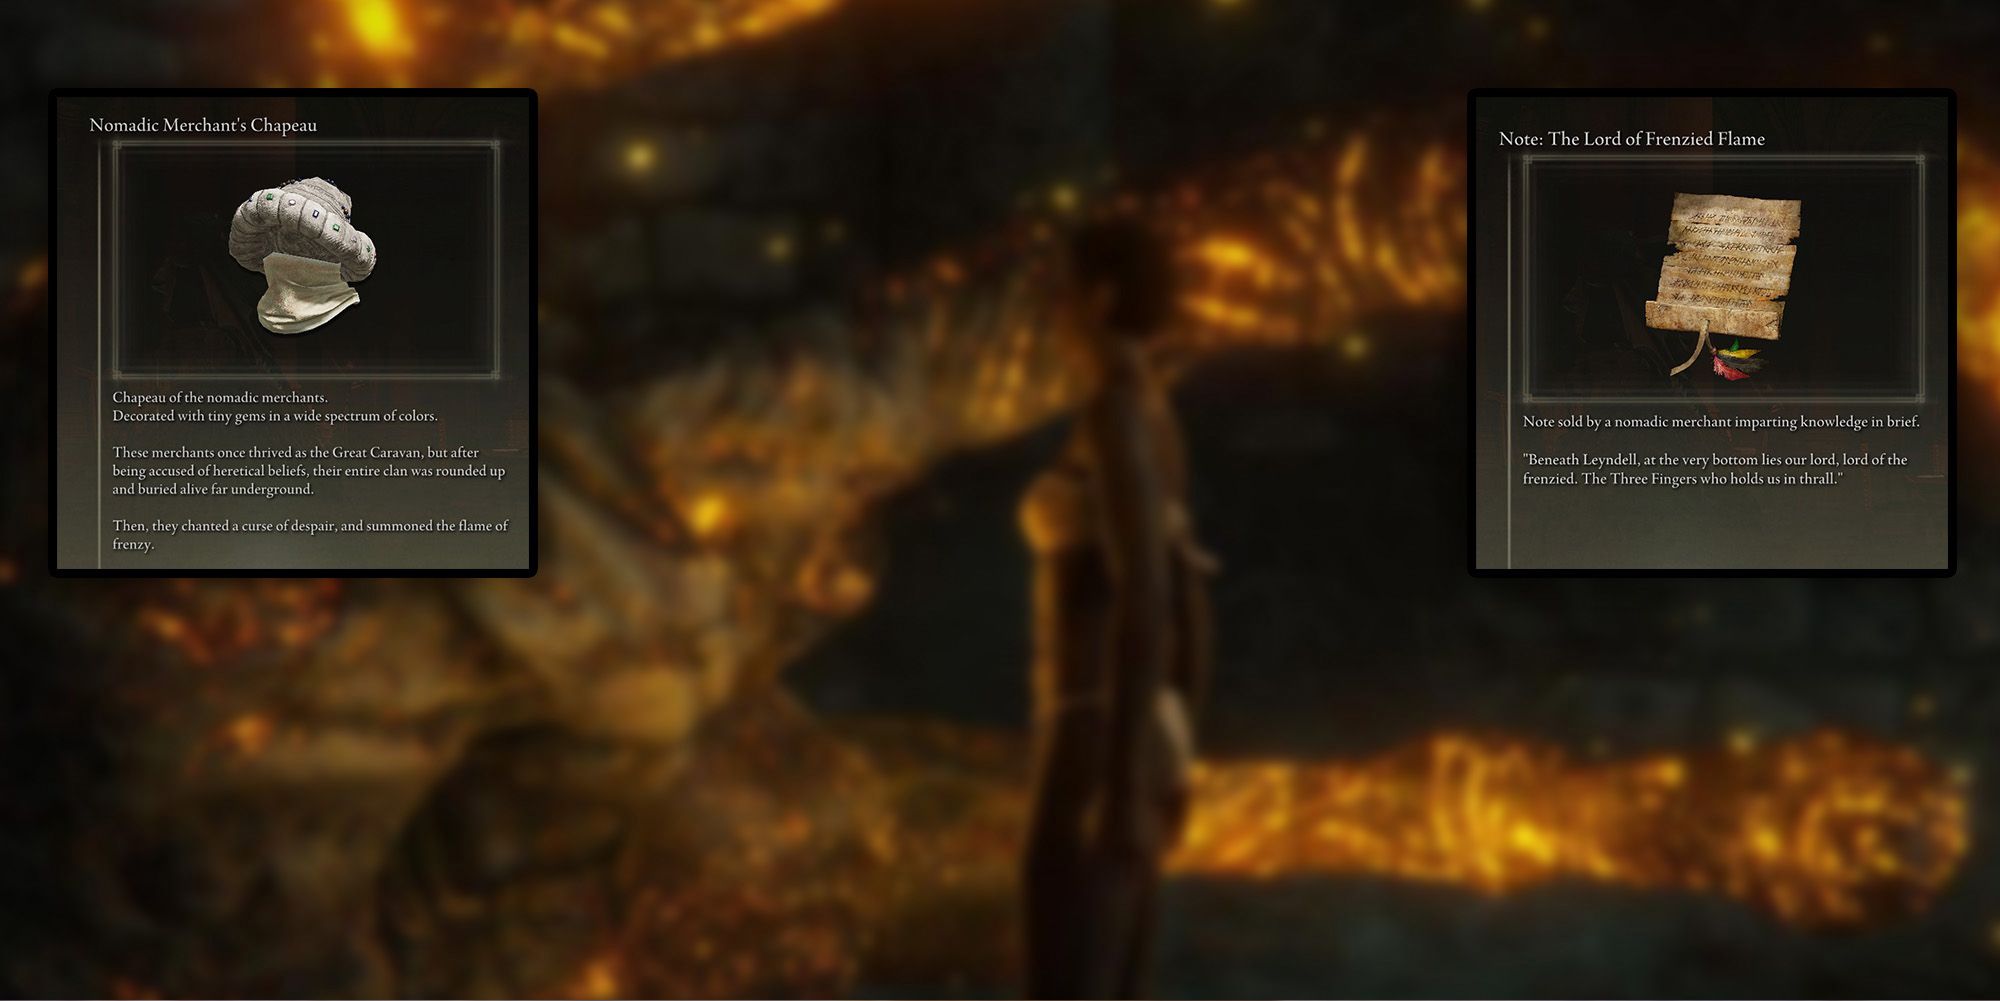 Elden Ring - PNG Of Both Merchat Armor Item Description And Frenzy Flame Note Overlaid On Image Of Player Interacting With Three Fingers